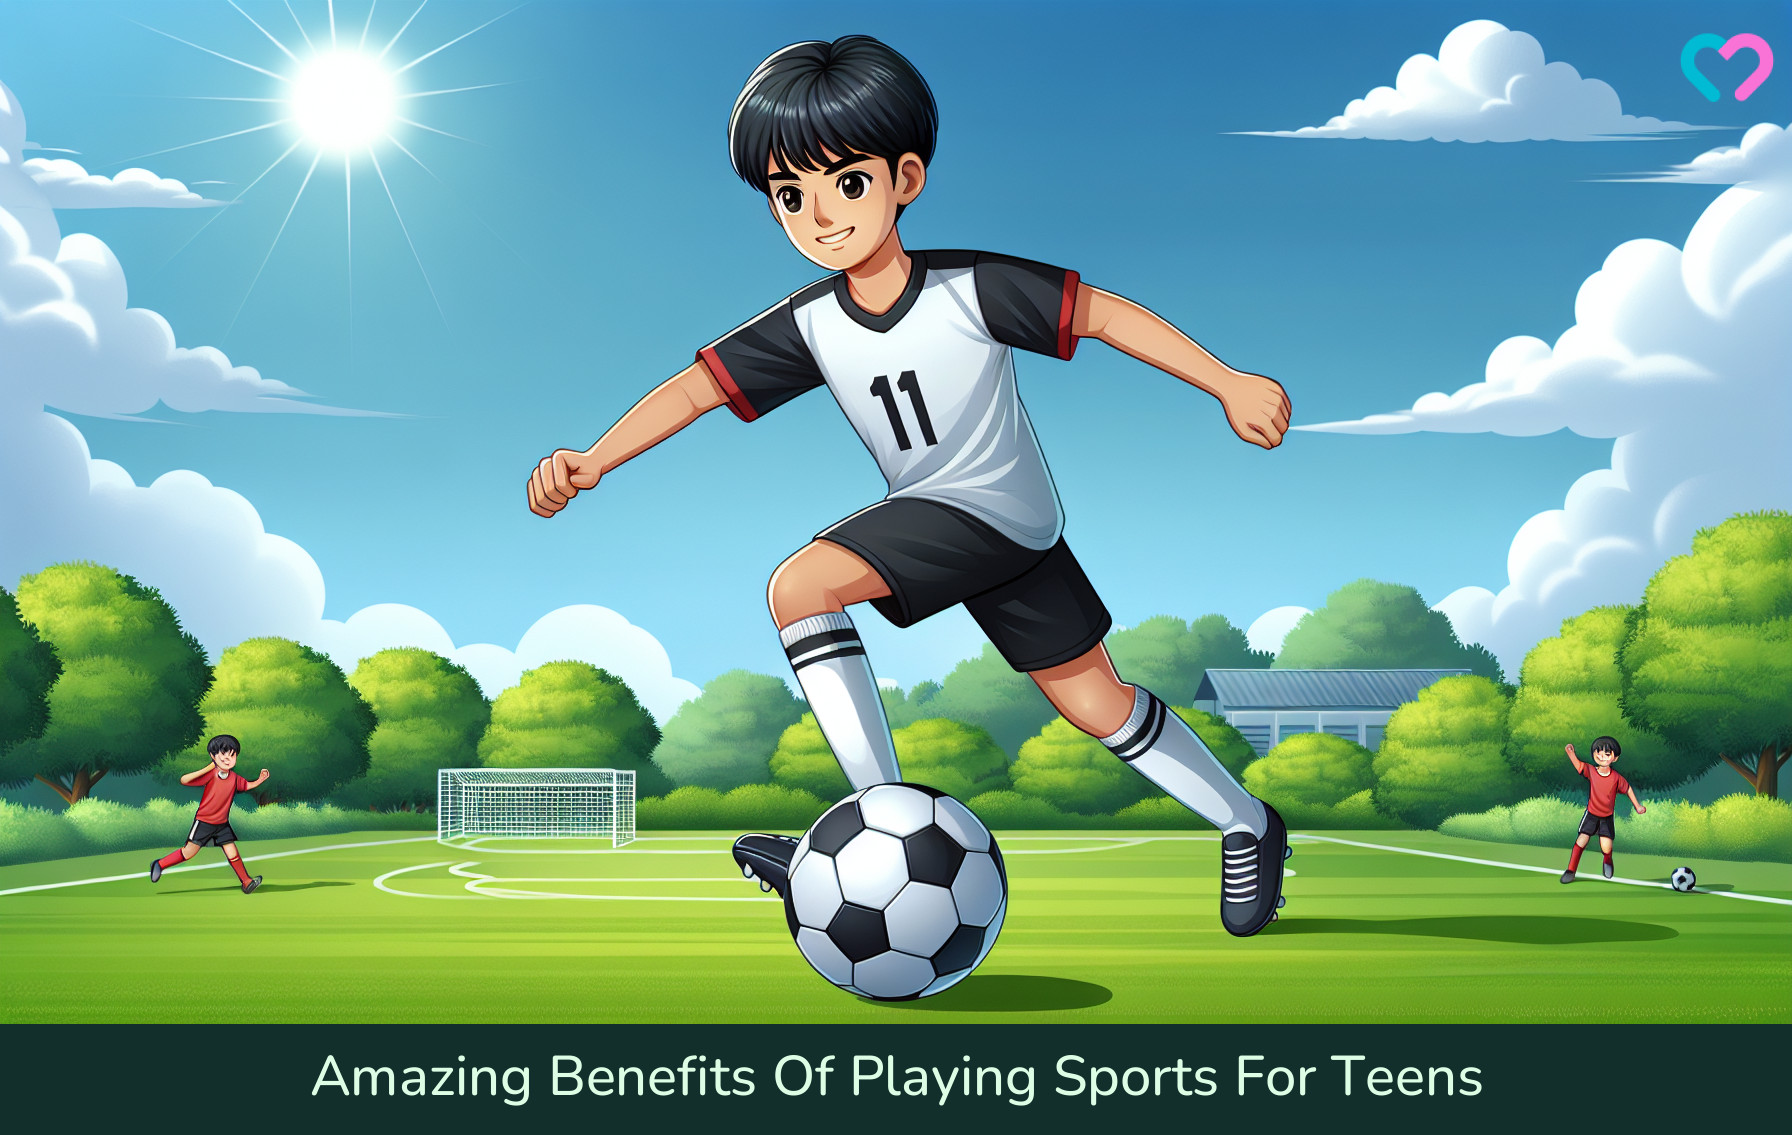 Benefits of Playing Sports For Teens_illustration